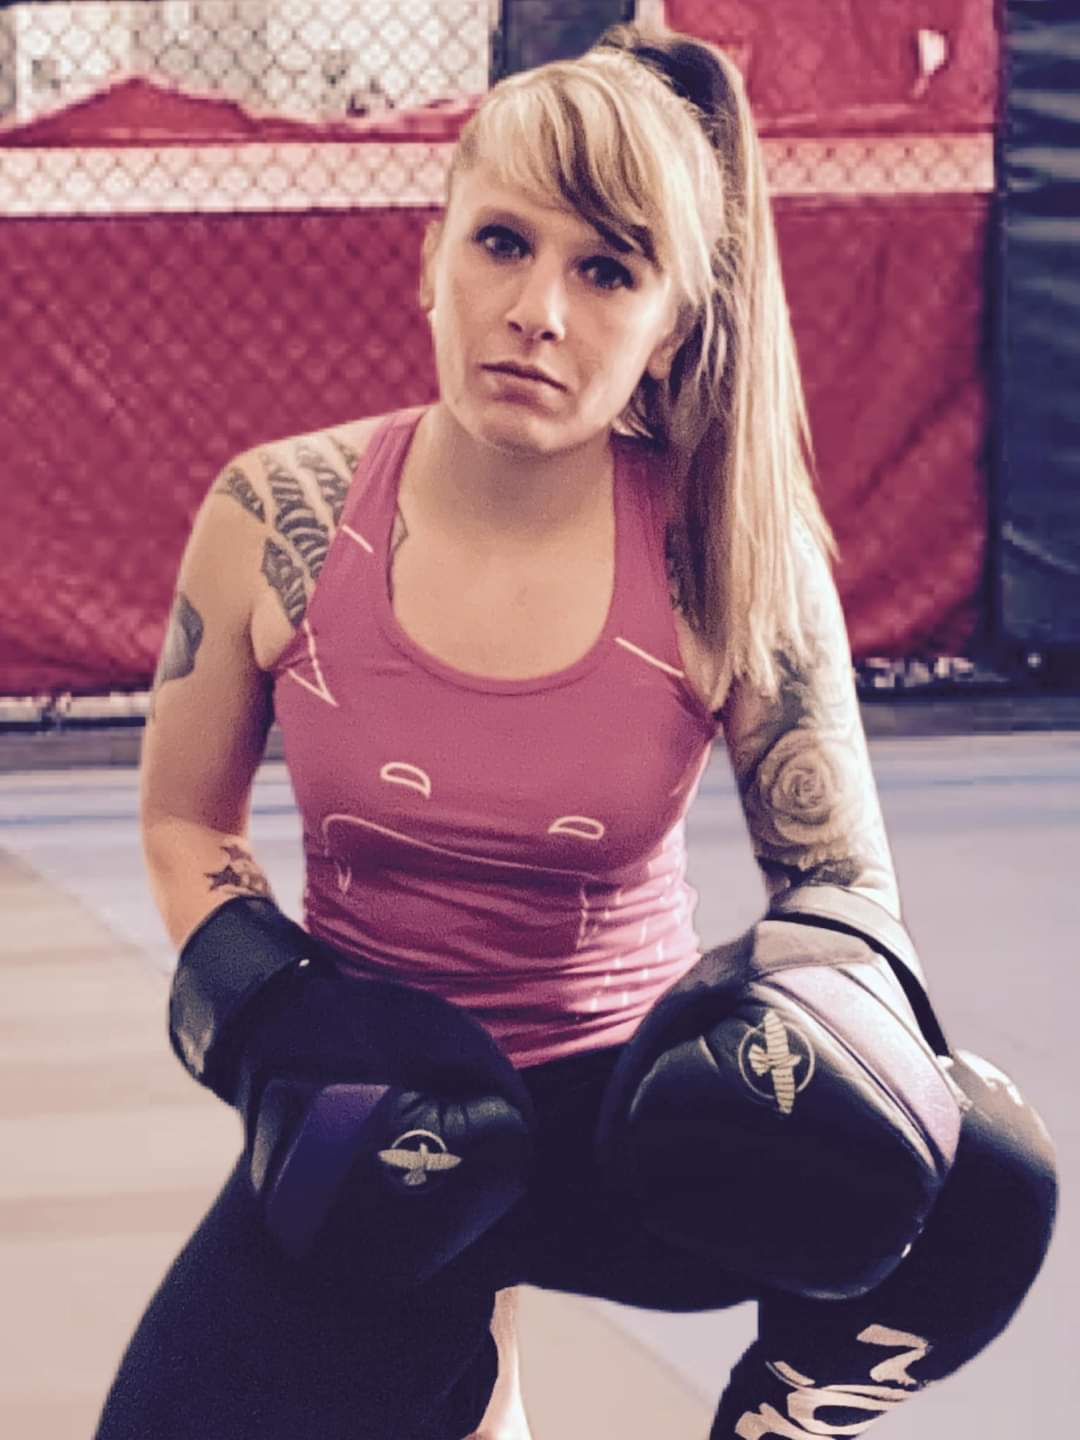 Alaina Dutill continues her journey at USKA Fight Night 98